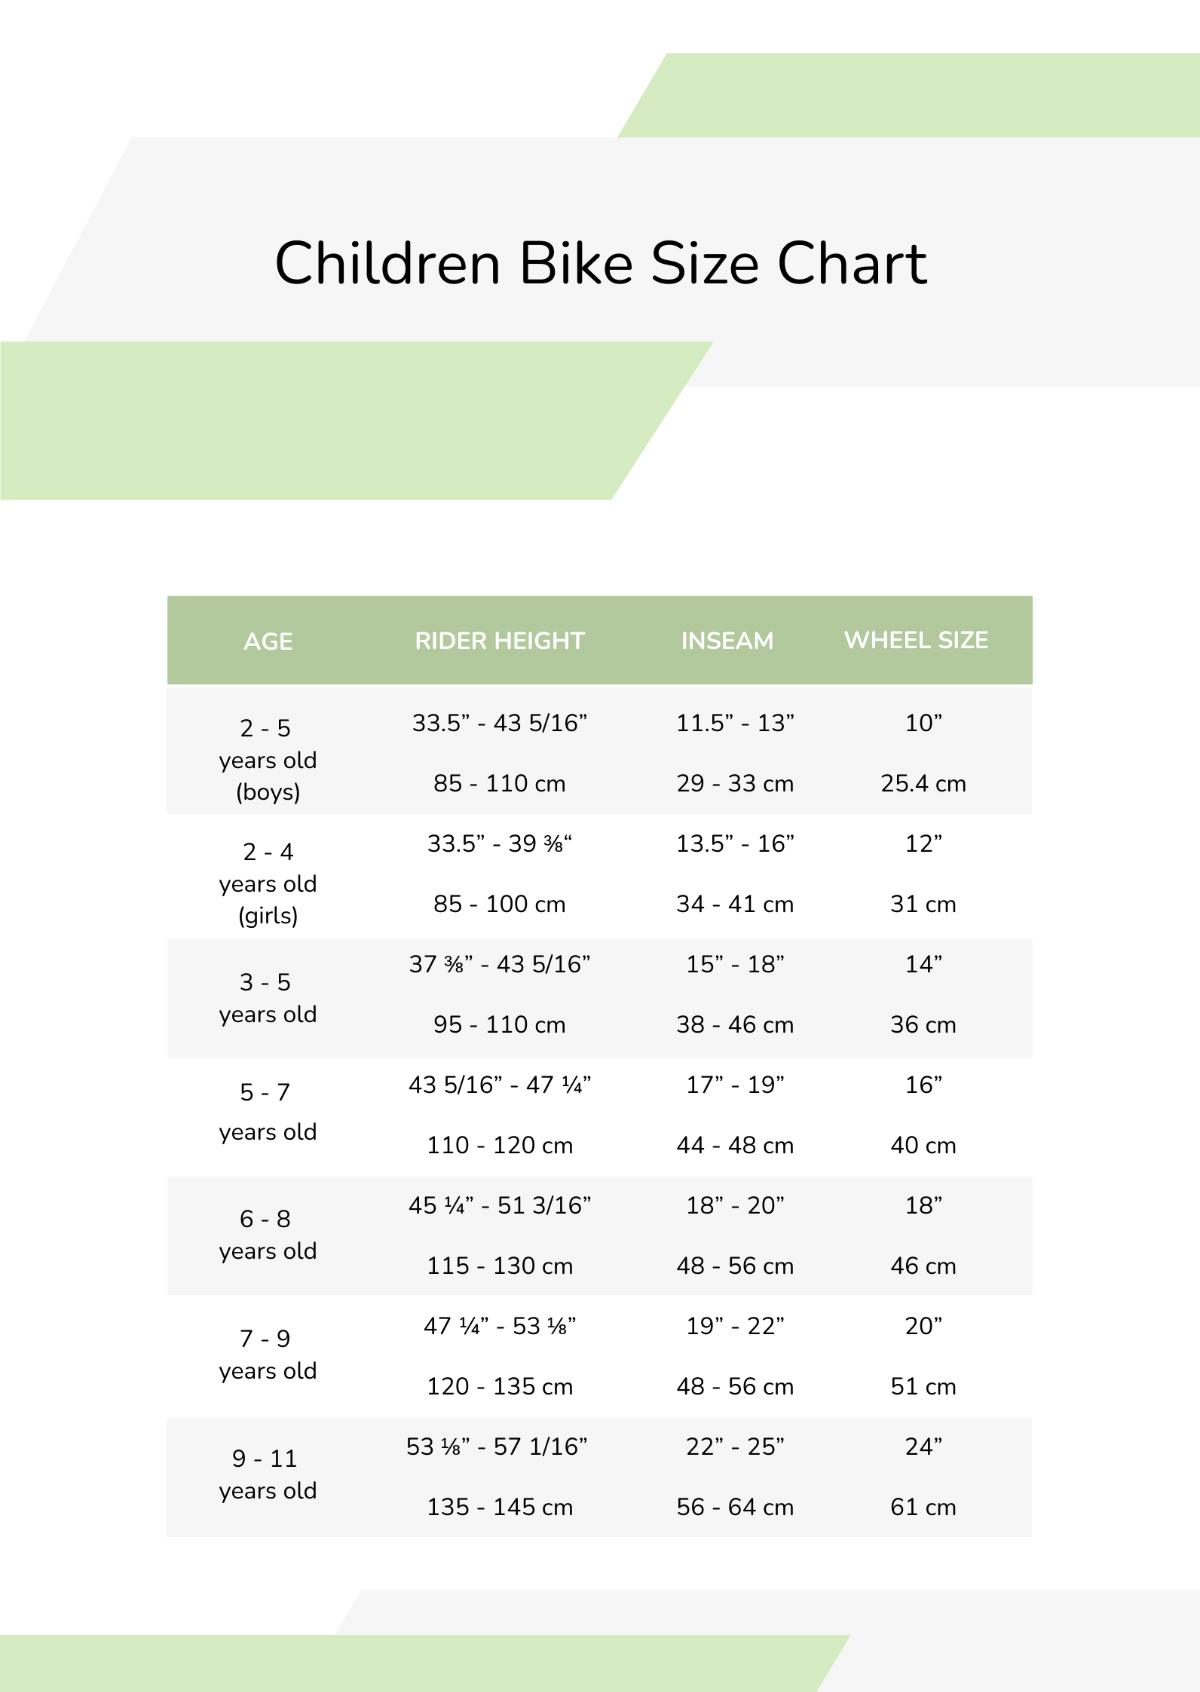 FREE Children's Chart Templates & Examples - Edit Online & Download ...